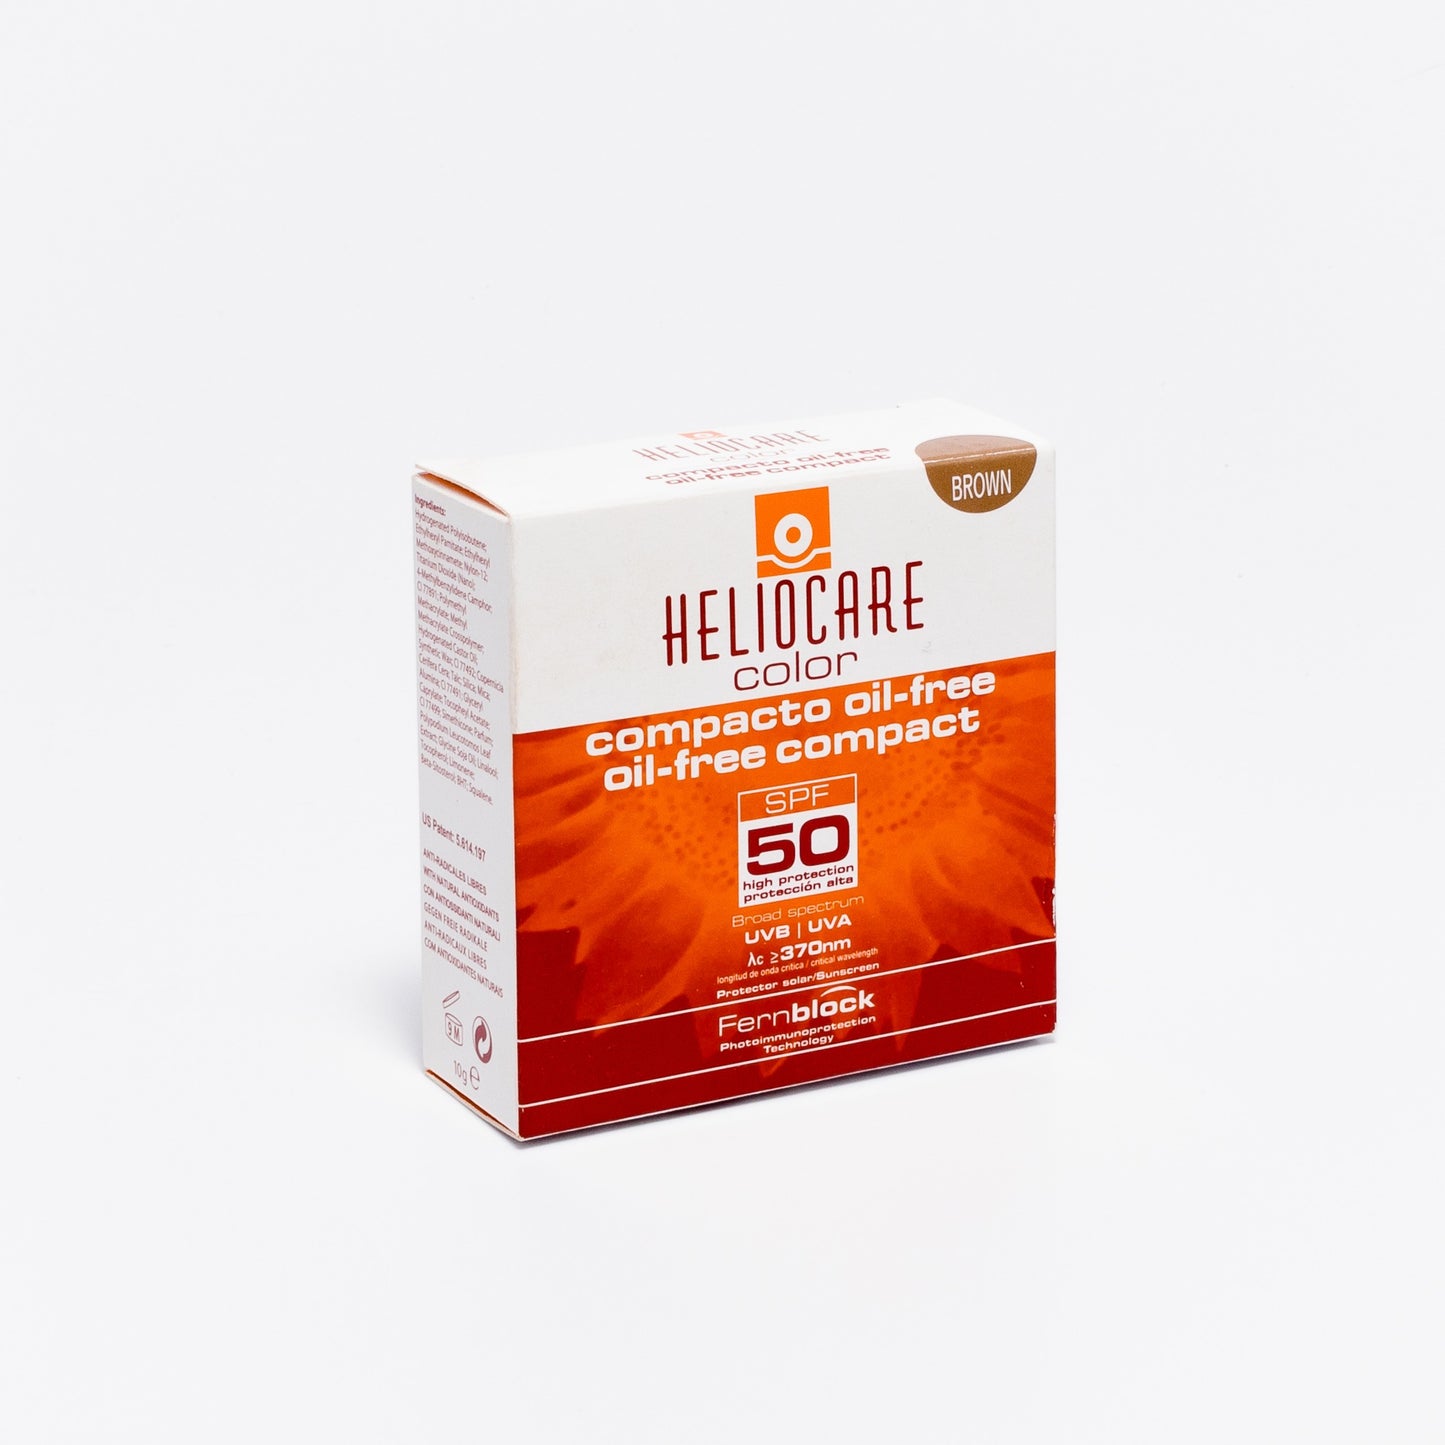 Heliocare - Oil-free Compact Brown SPF 50